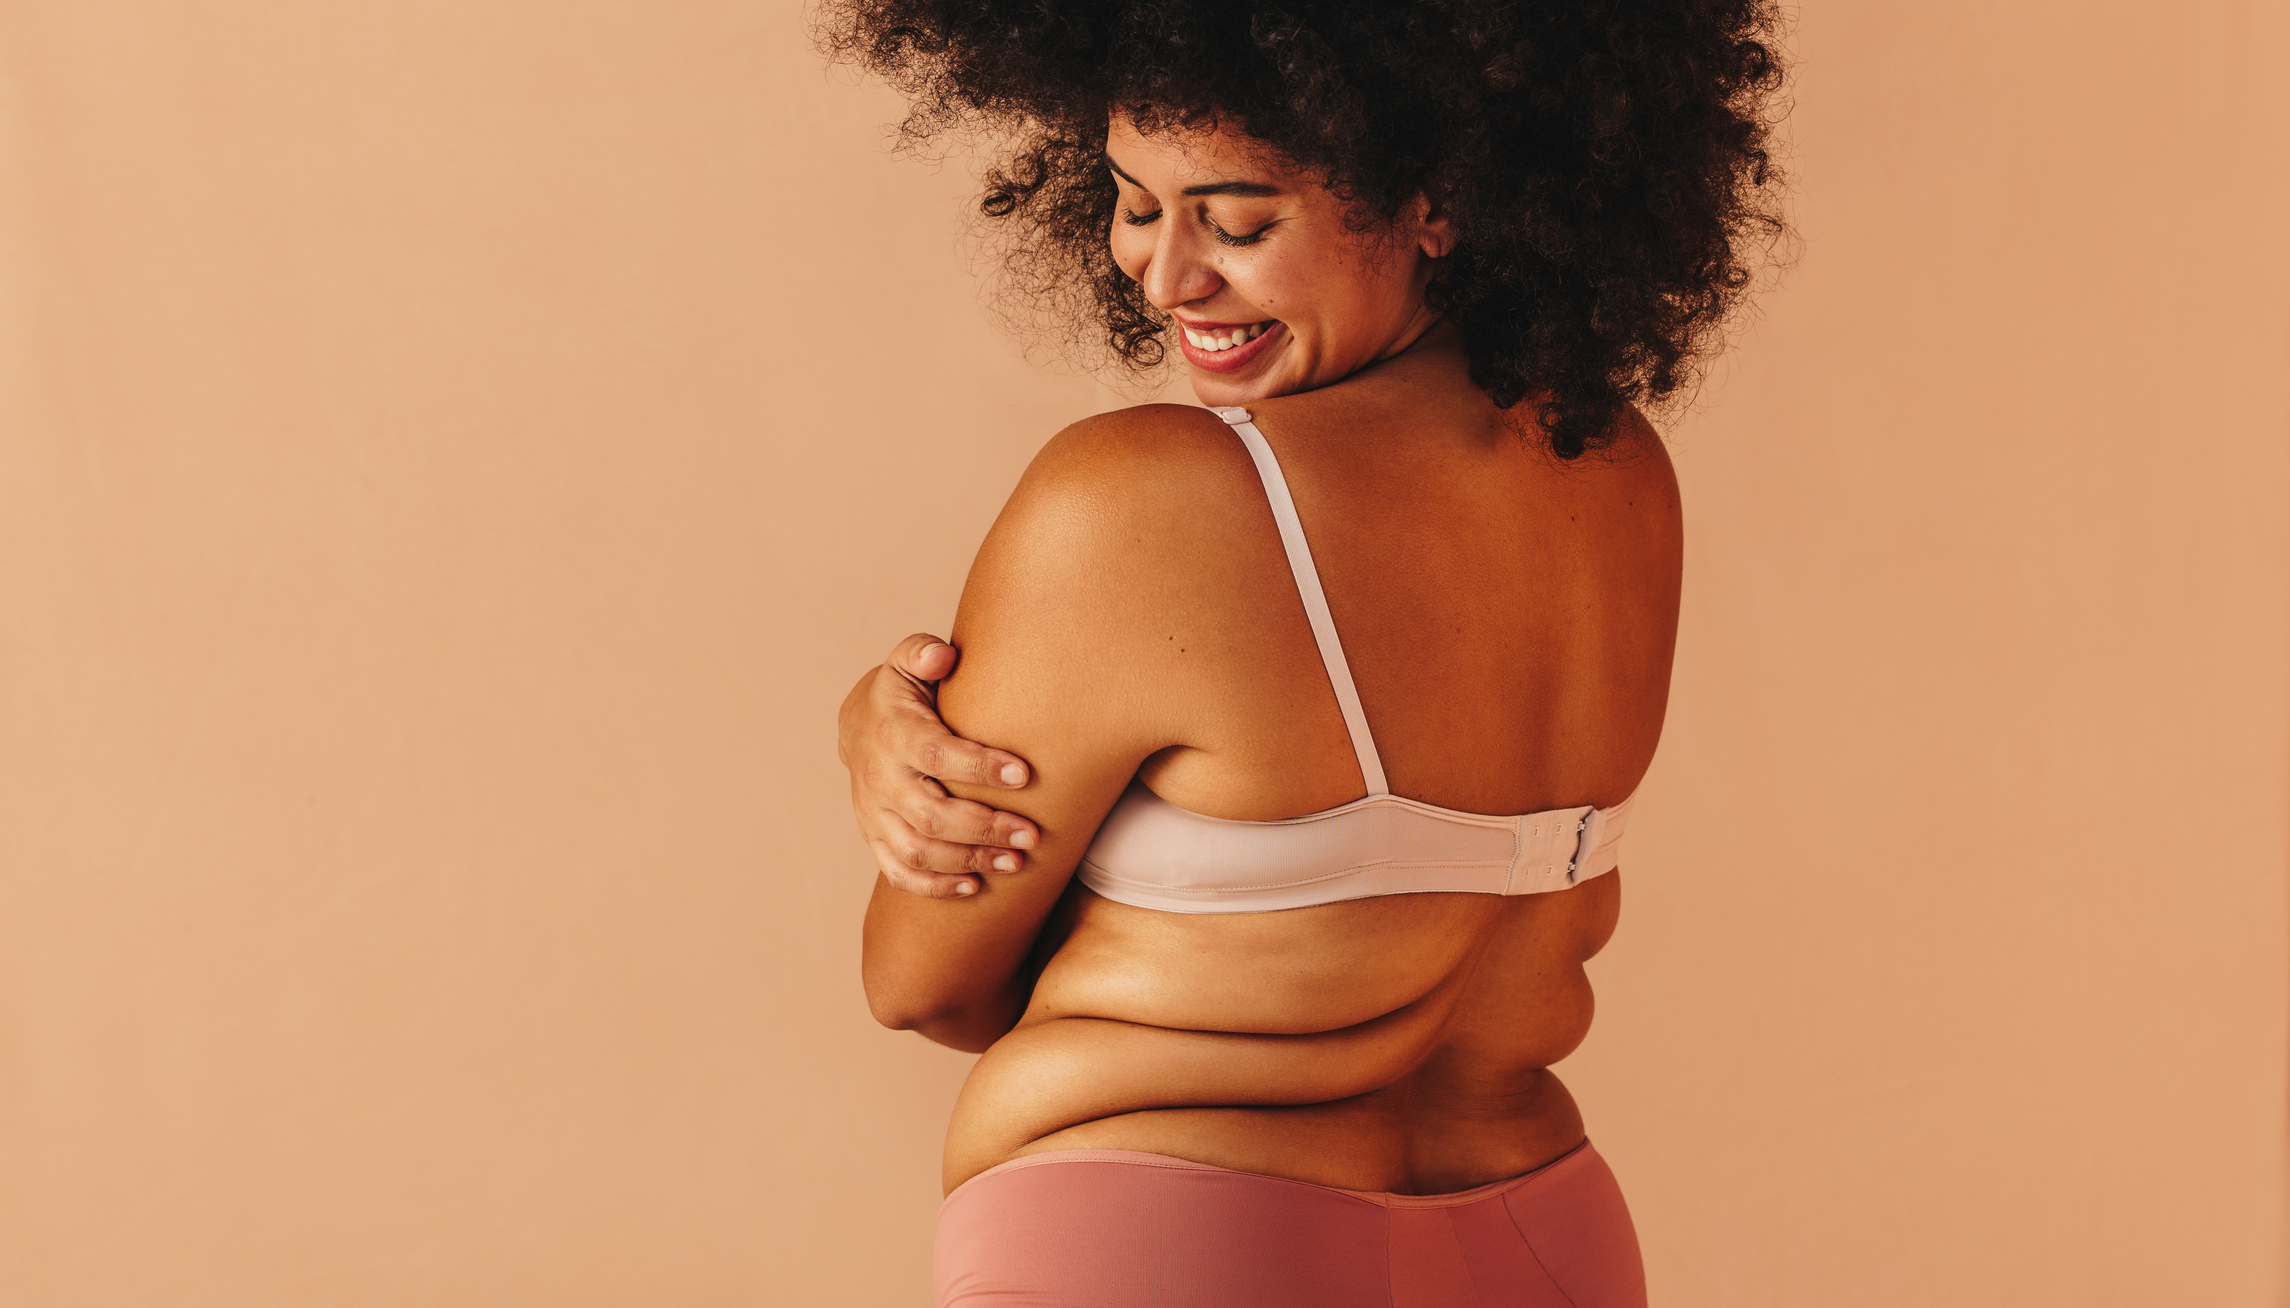 Self-loving plus size woman smiling happily while wearing underwear. Body positive woman with an Afro hairstyle embracing her natural body and curves.